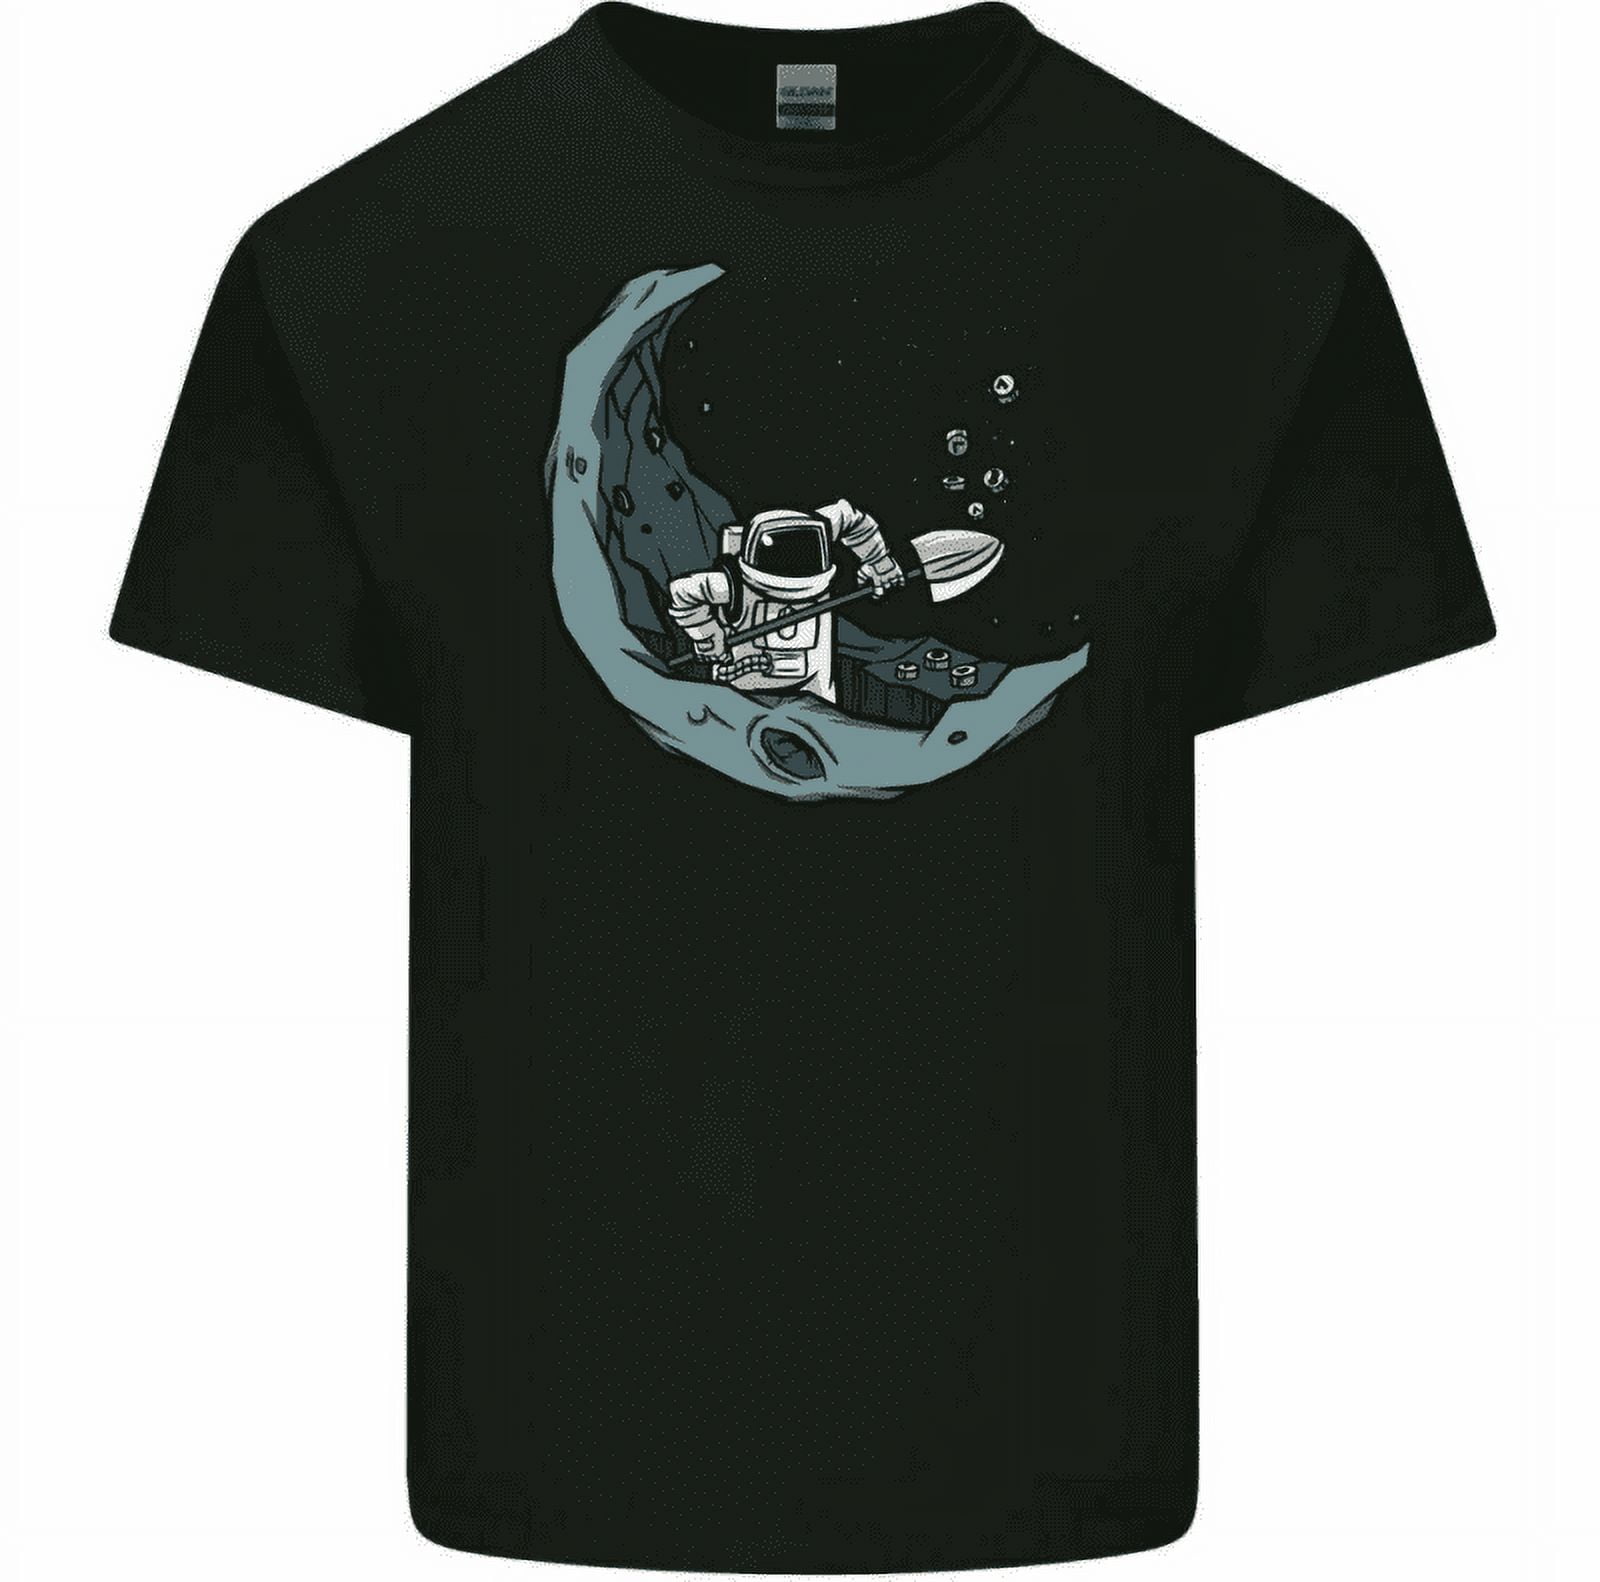 Cryptocurrency Mining the Moon Men's Funny T-Shirt Astronaut Space ...